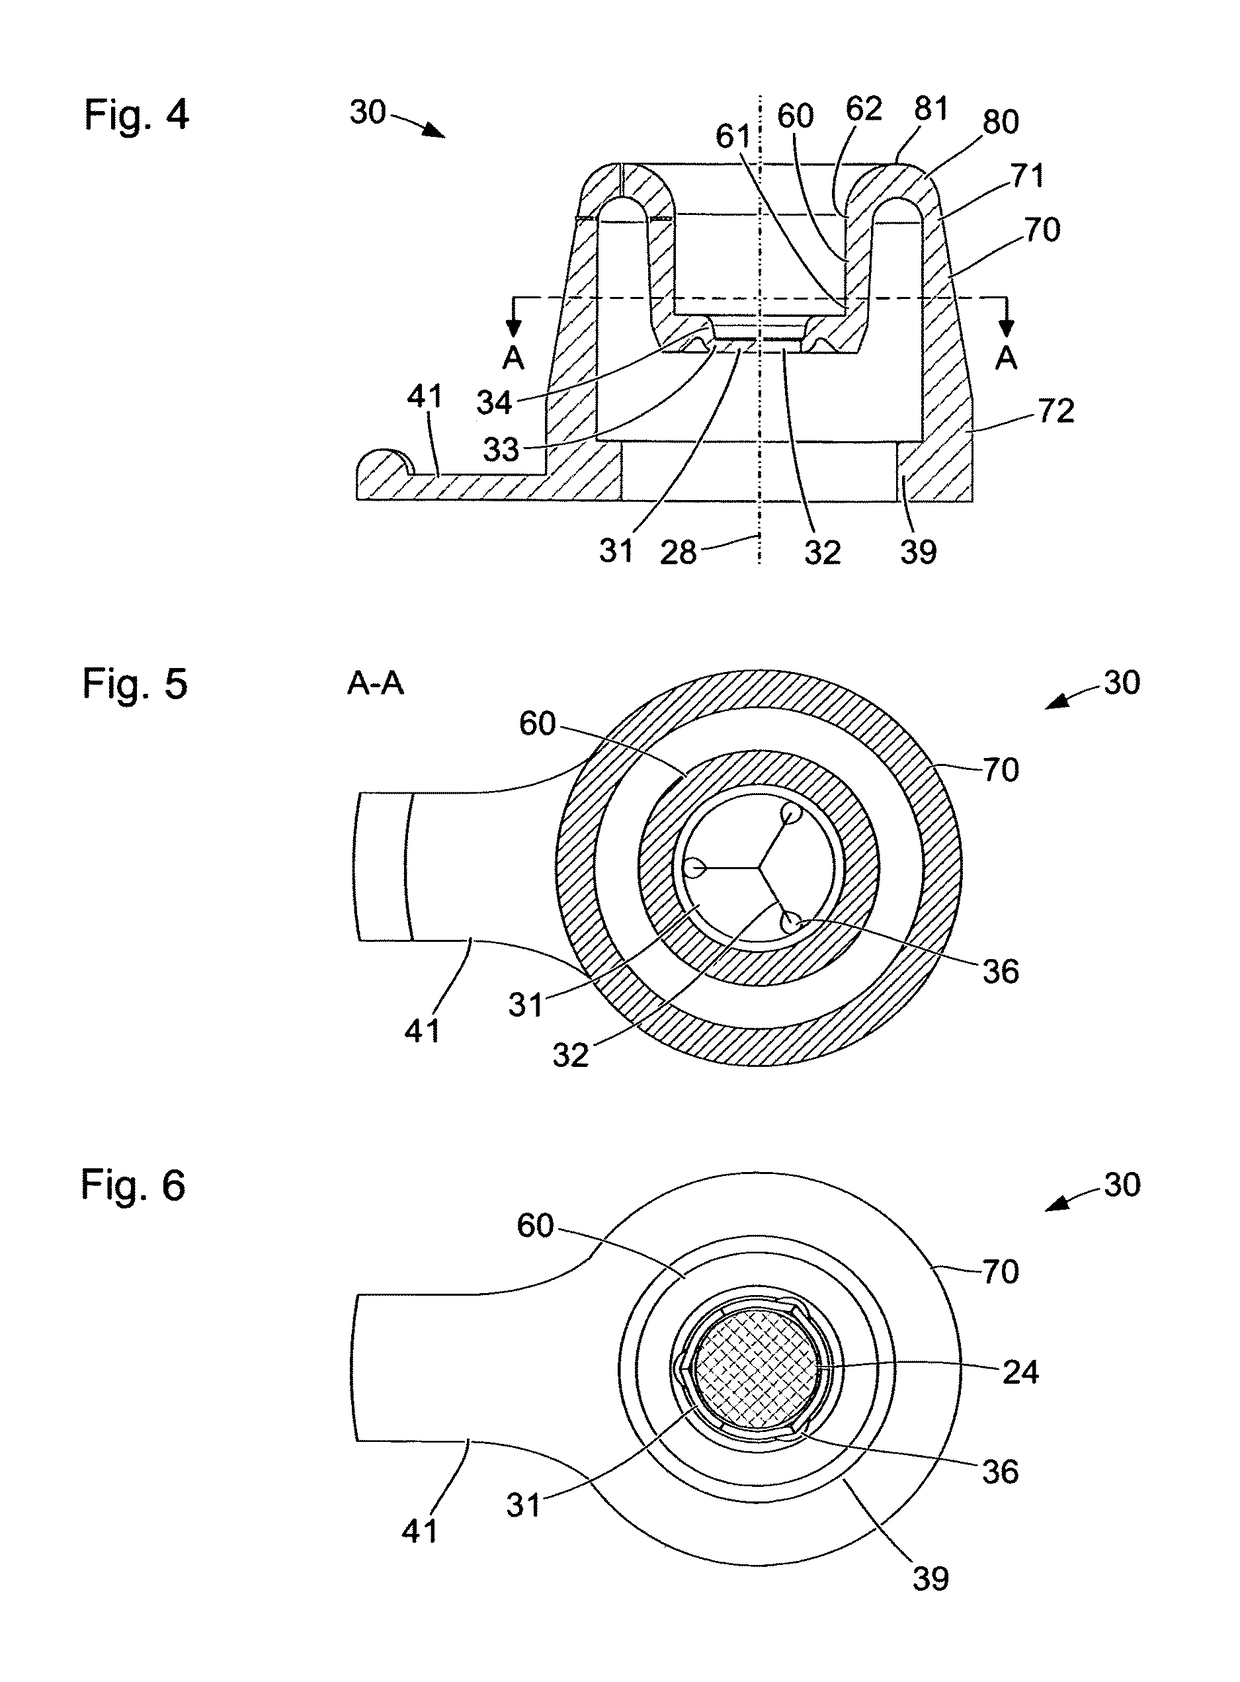 Sealing device for sealing a passage for a medical instrument